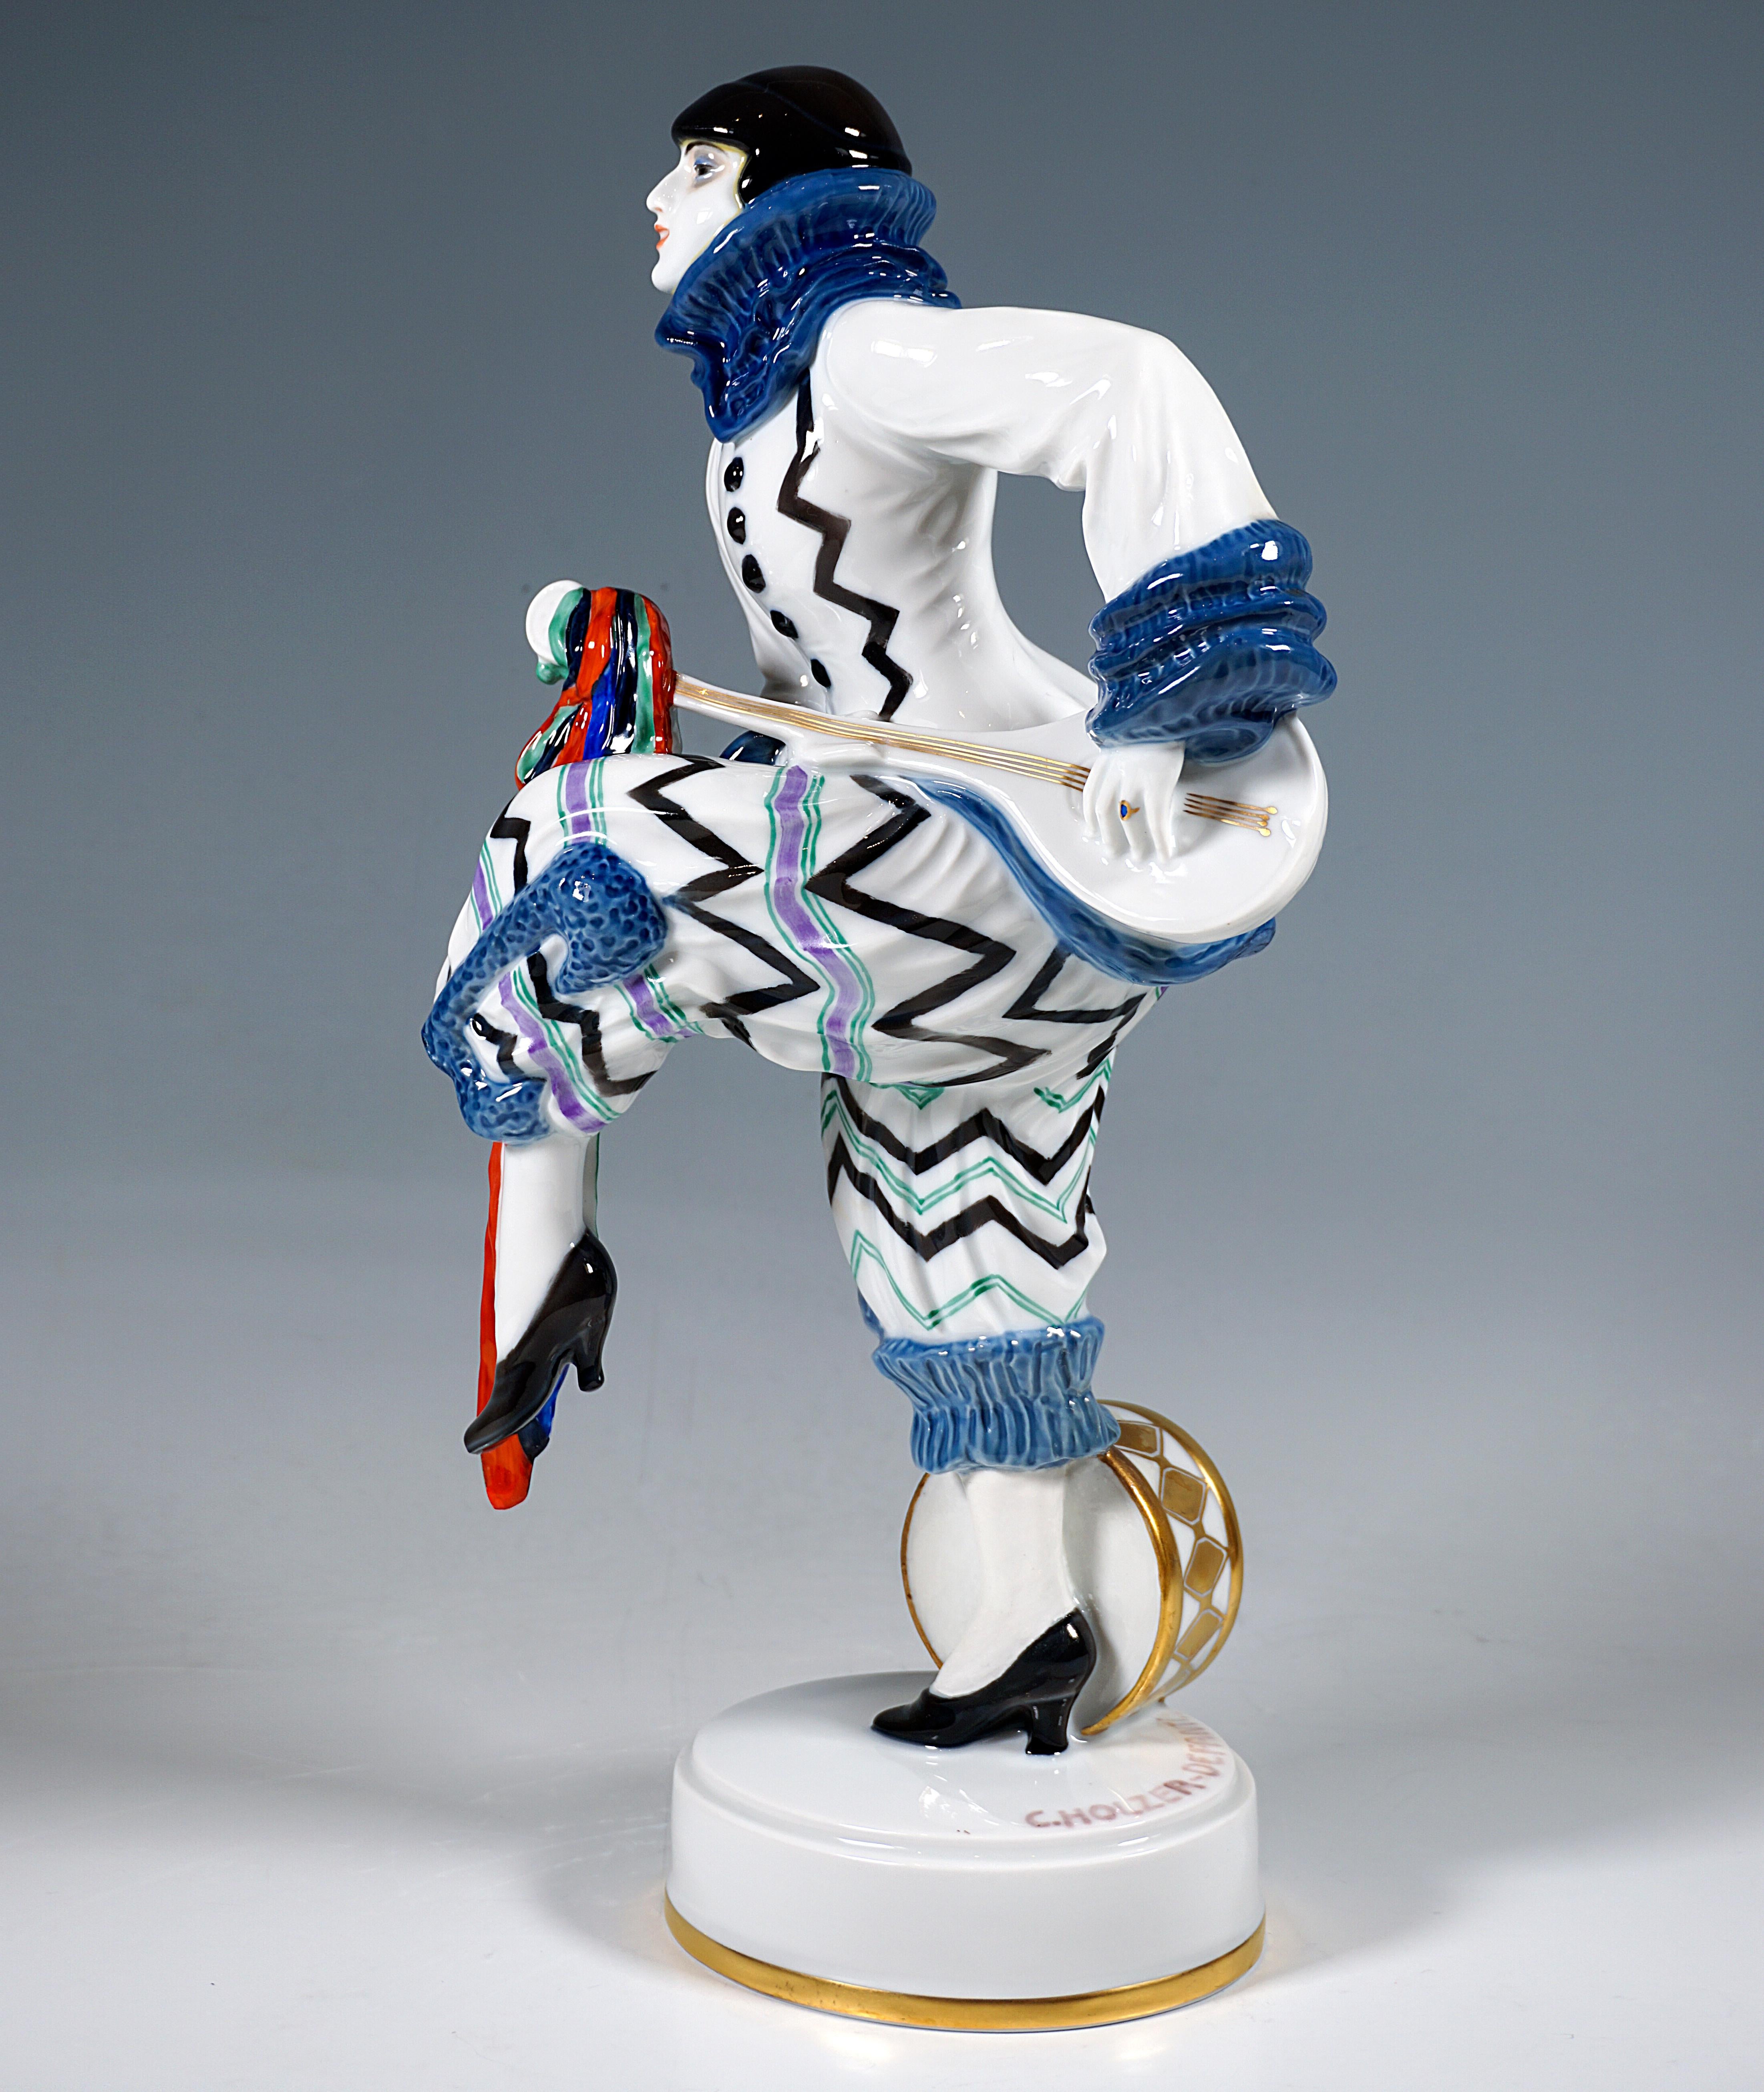 Hand-Crafted Art Déco Porcelain Figurine 'Merry March', C. Holzer-Defanti, Rosenthal Germany